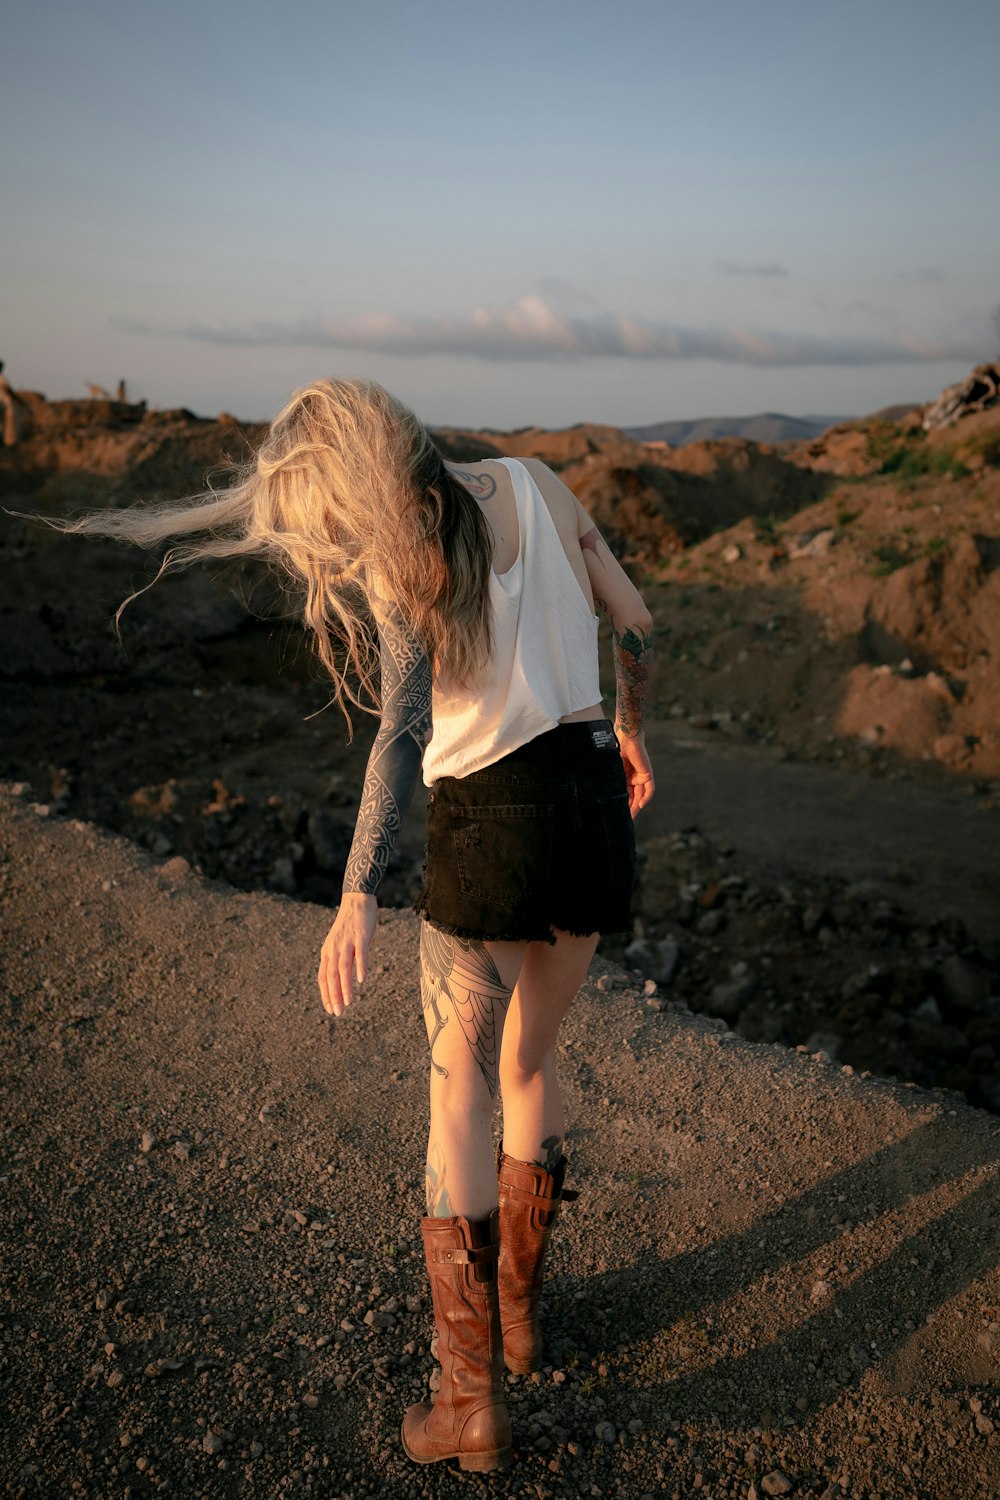 a woman with long hair walking on a dirt road